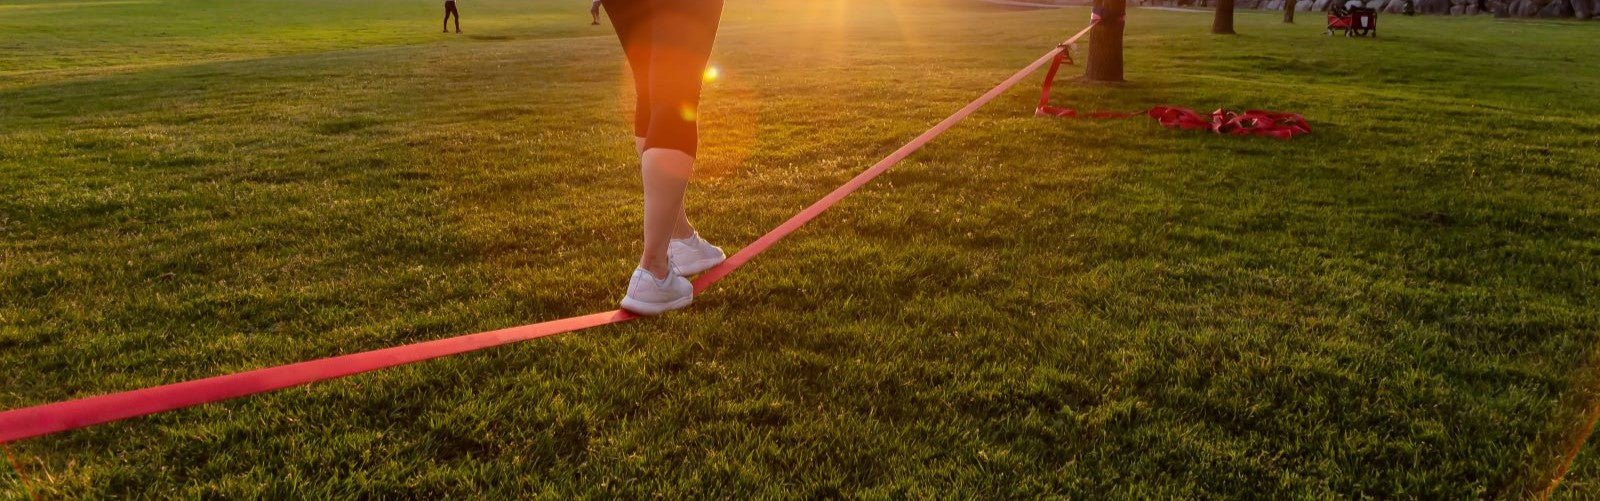 Mastering the Art of Slacklining: A Step-by-Step Guide - Next Adventure